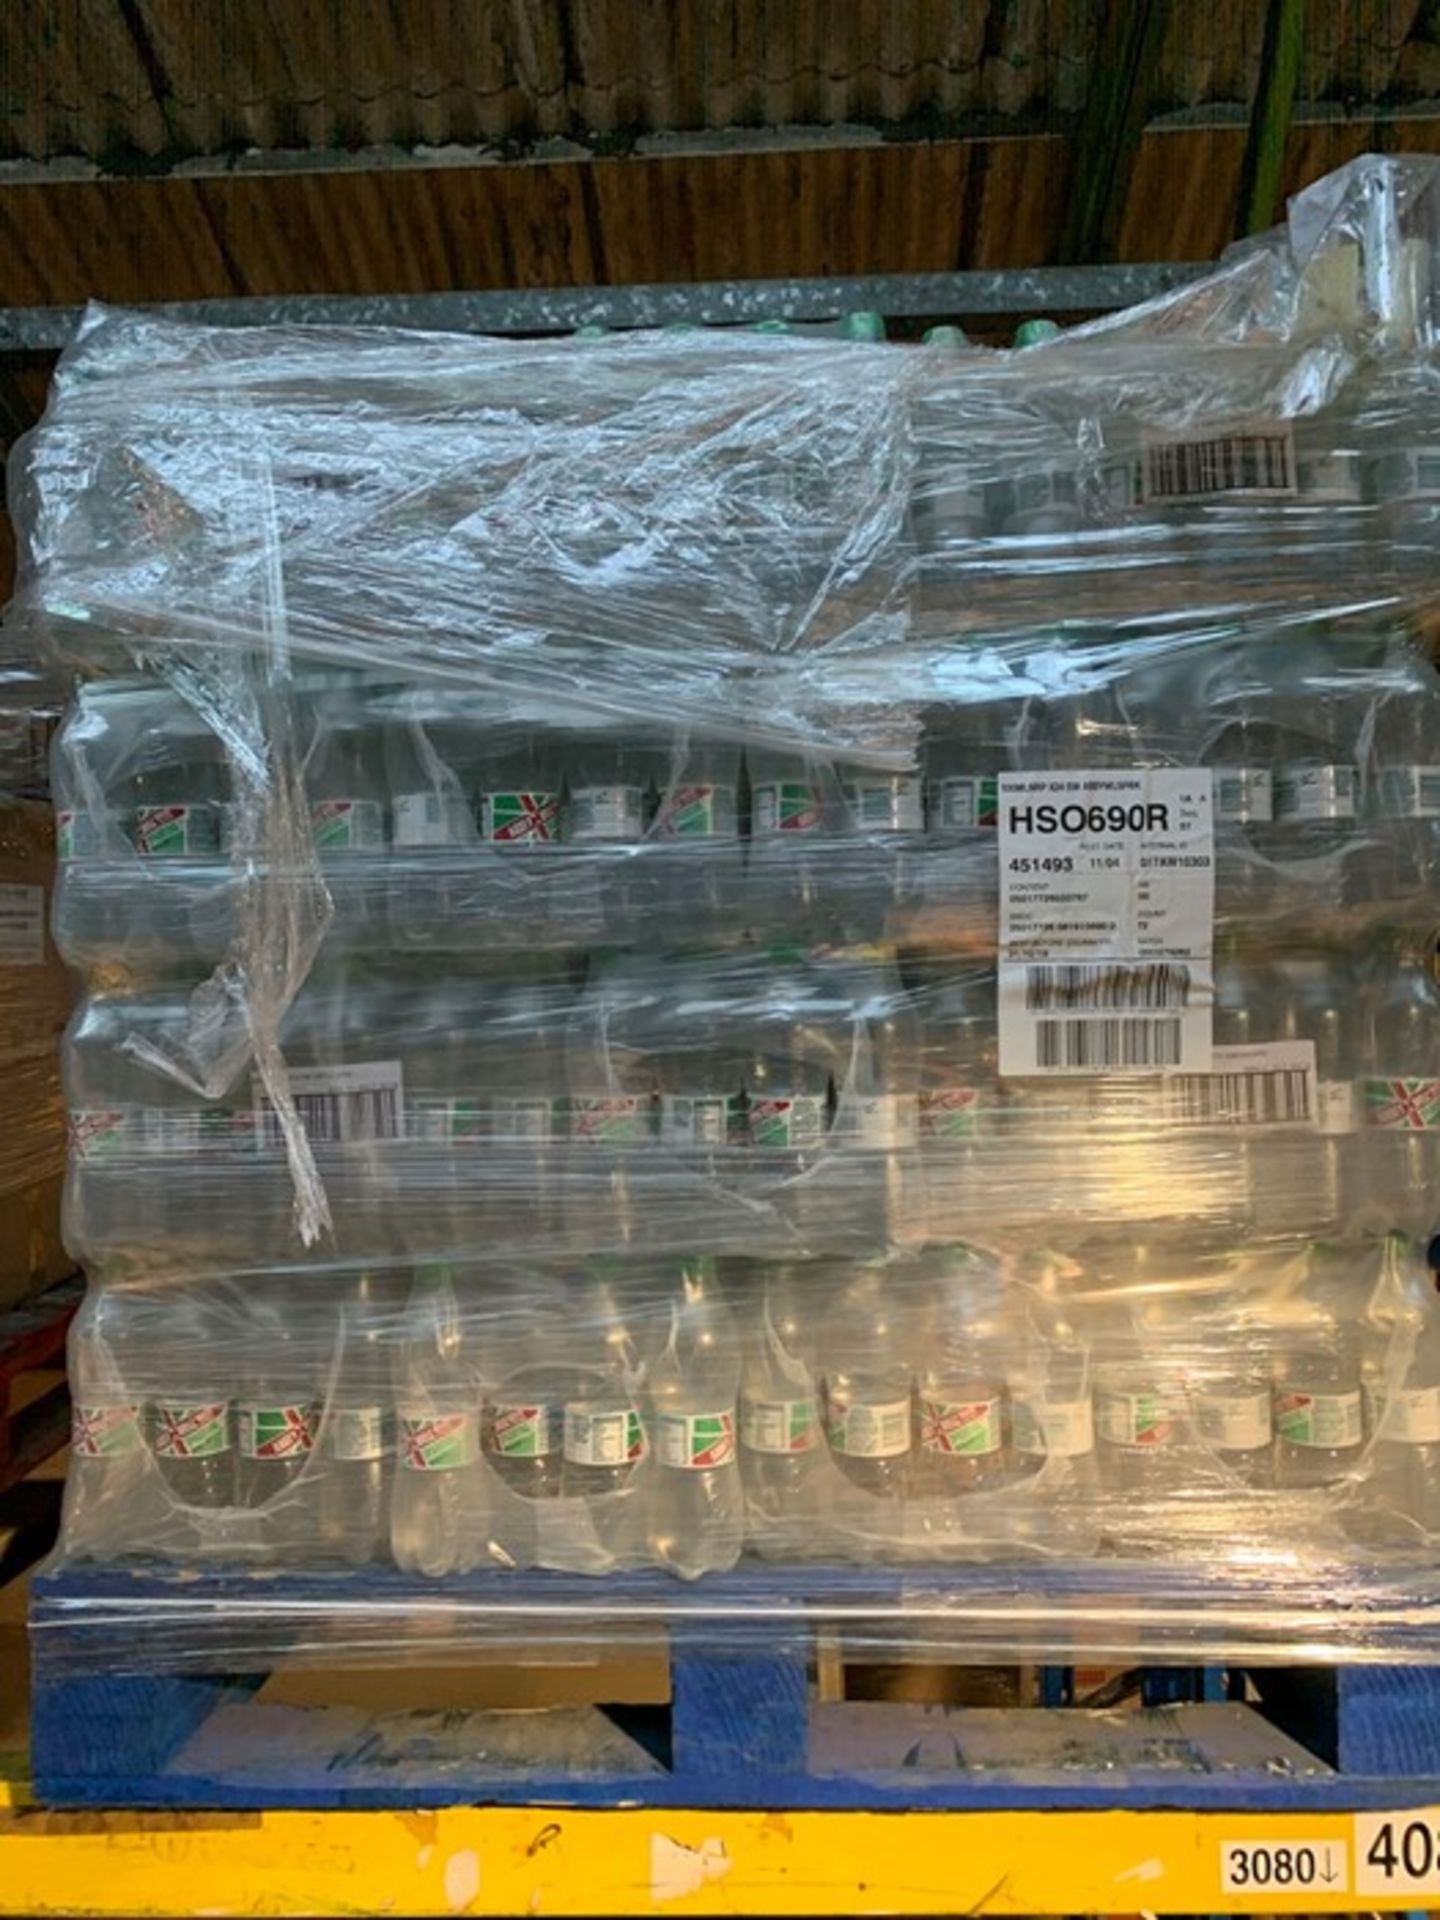 1 LOT TO CONTAIN 48 LARGE PACKS OF ABBEY WELL SPARKLING WATER / 24 BOTTLES PER PACK / BEST BEFORE: